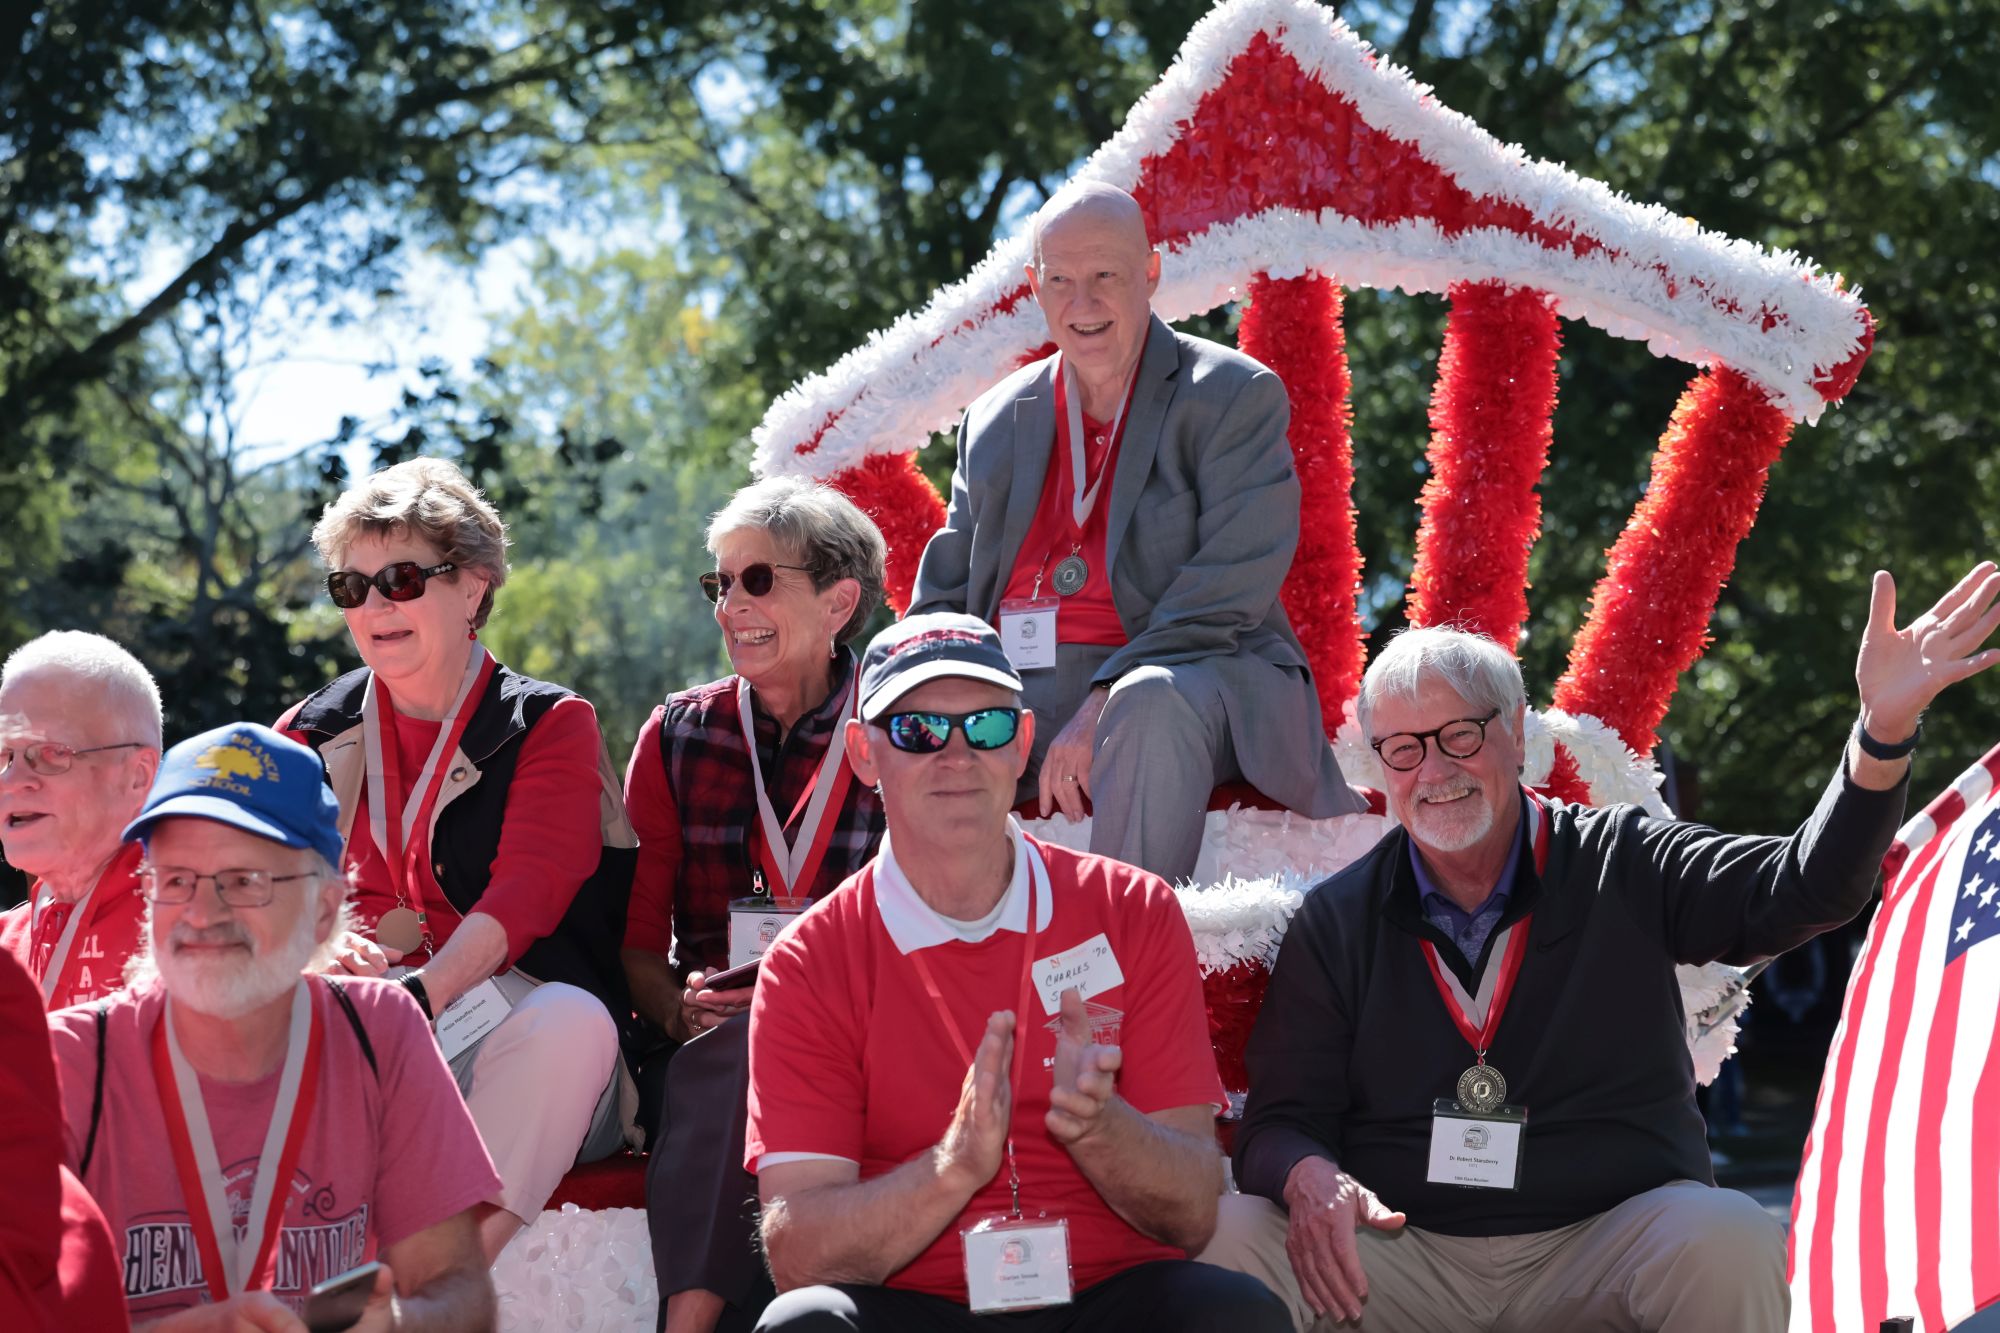 Newberry College will hold its centennial Homecoming celebration on campus Oct. 28-30.